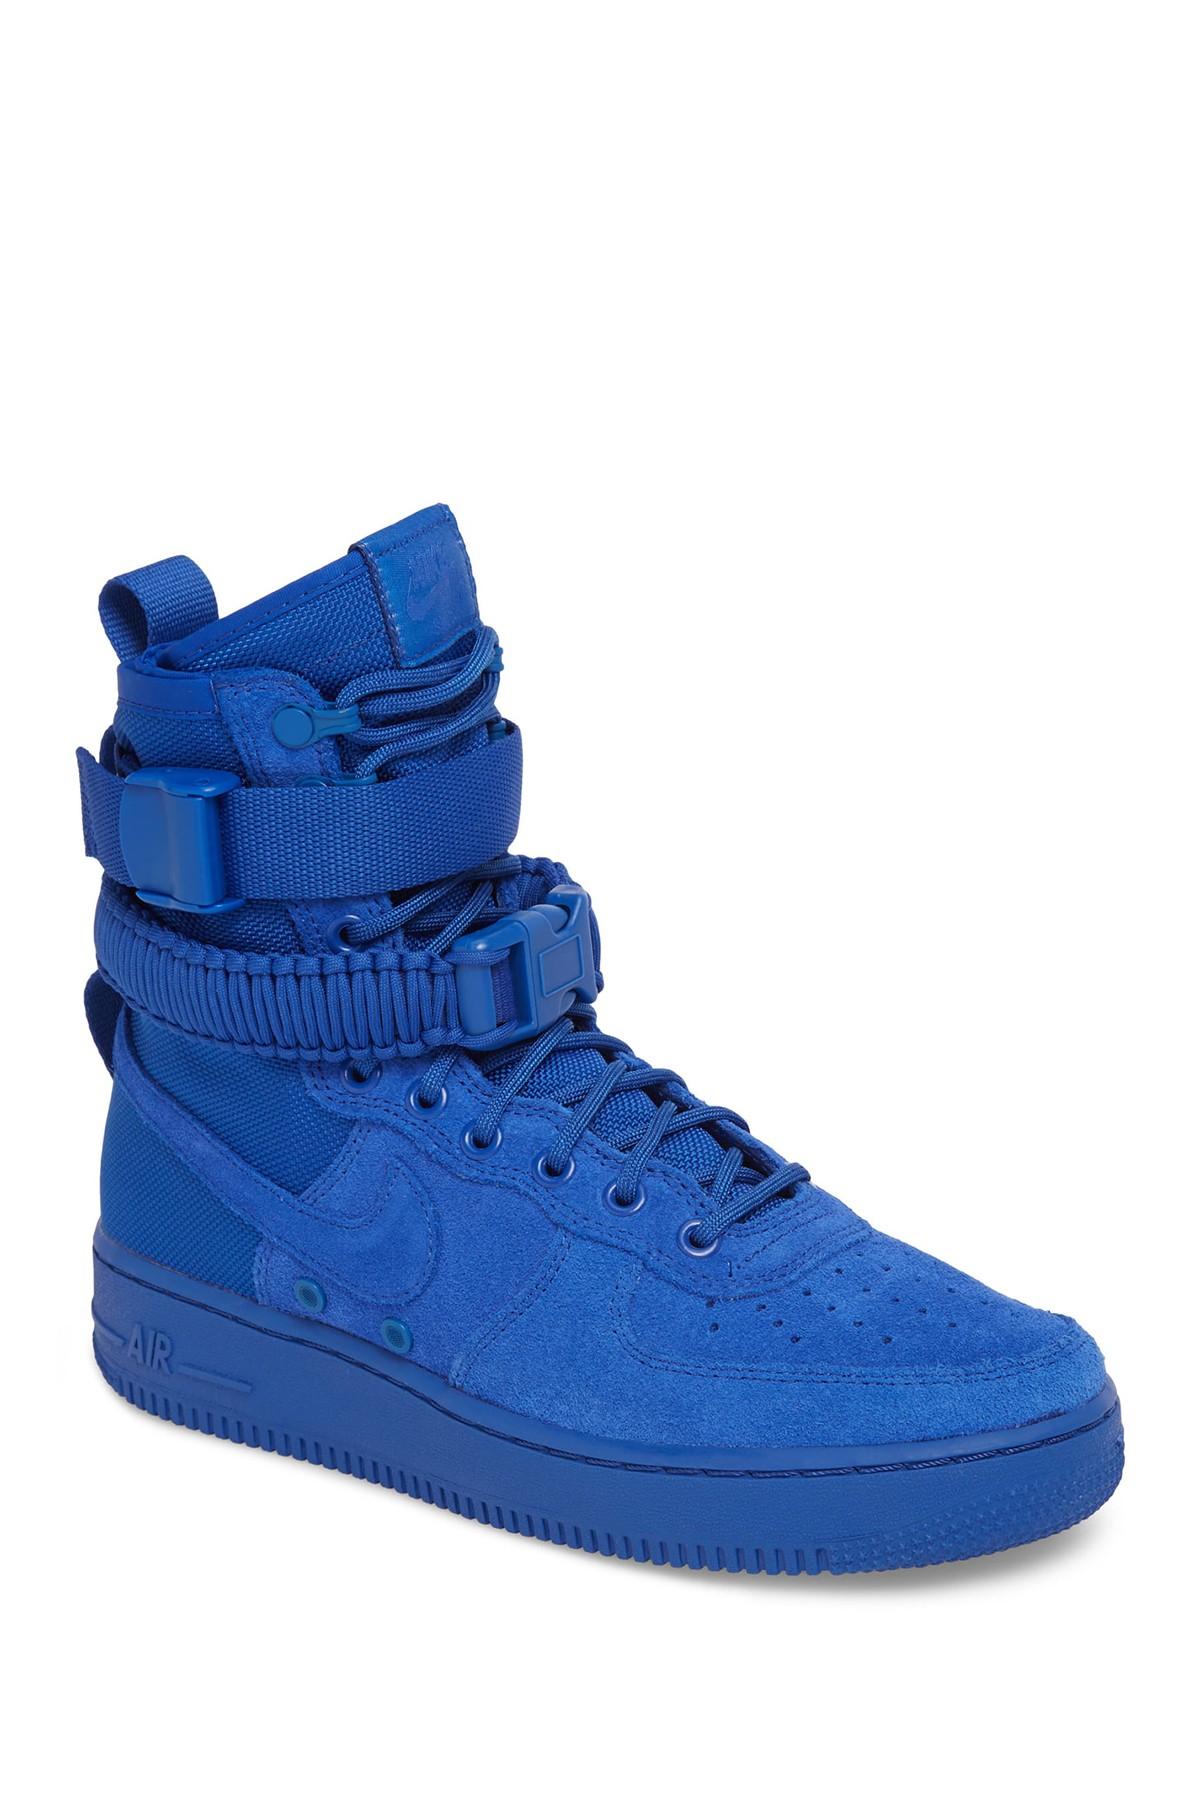 Nike Leather Sf Air Force 1 Sneakers in Midnight Navy (Blue) for Men - Save  76% | Lyst